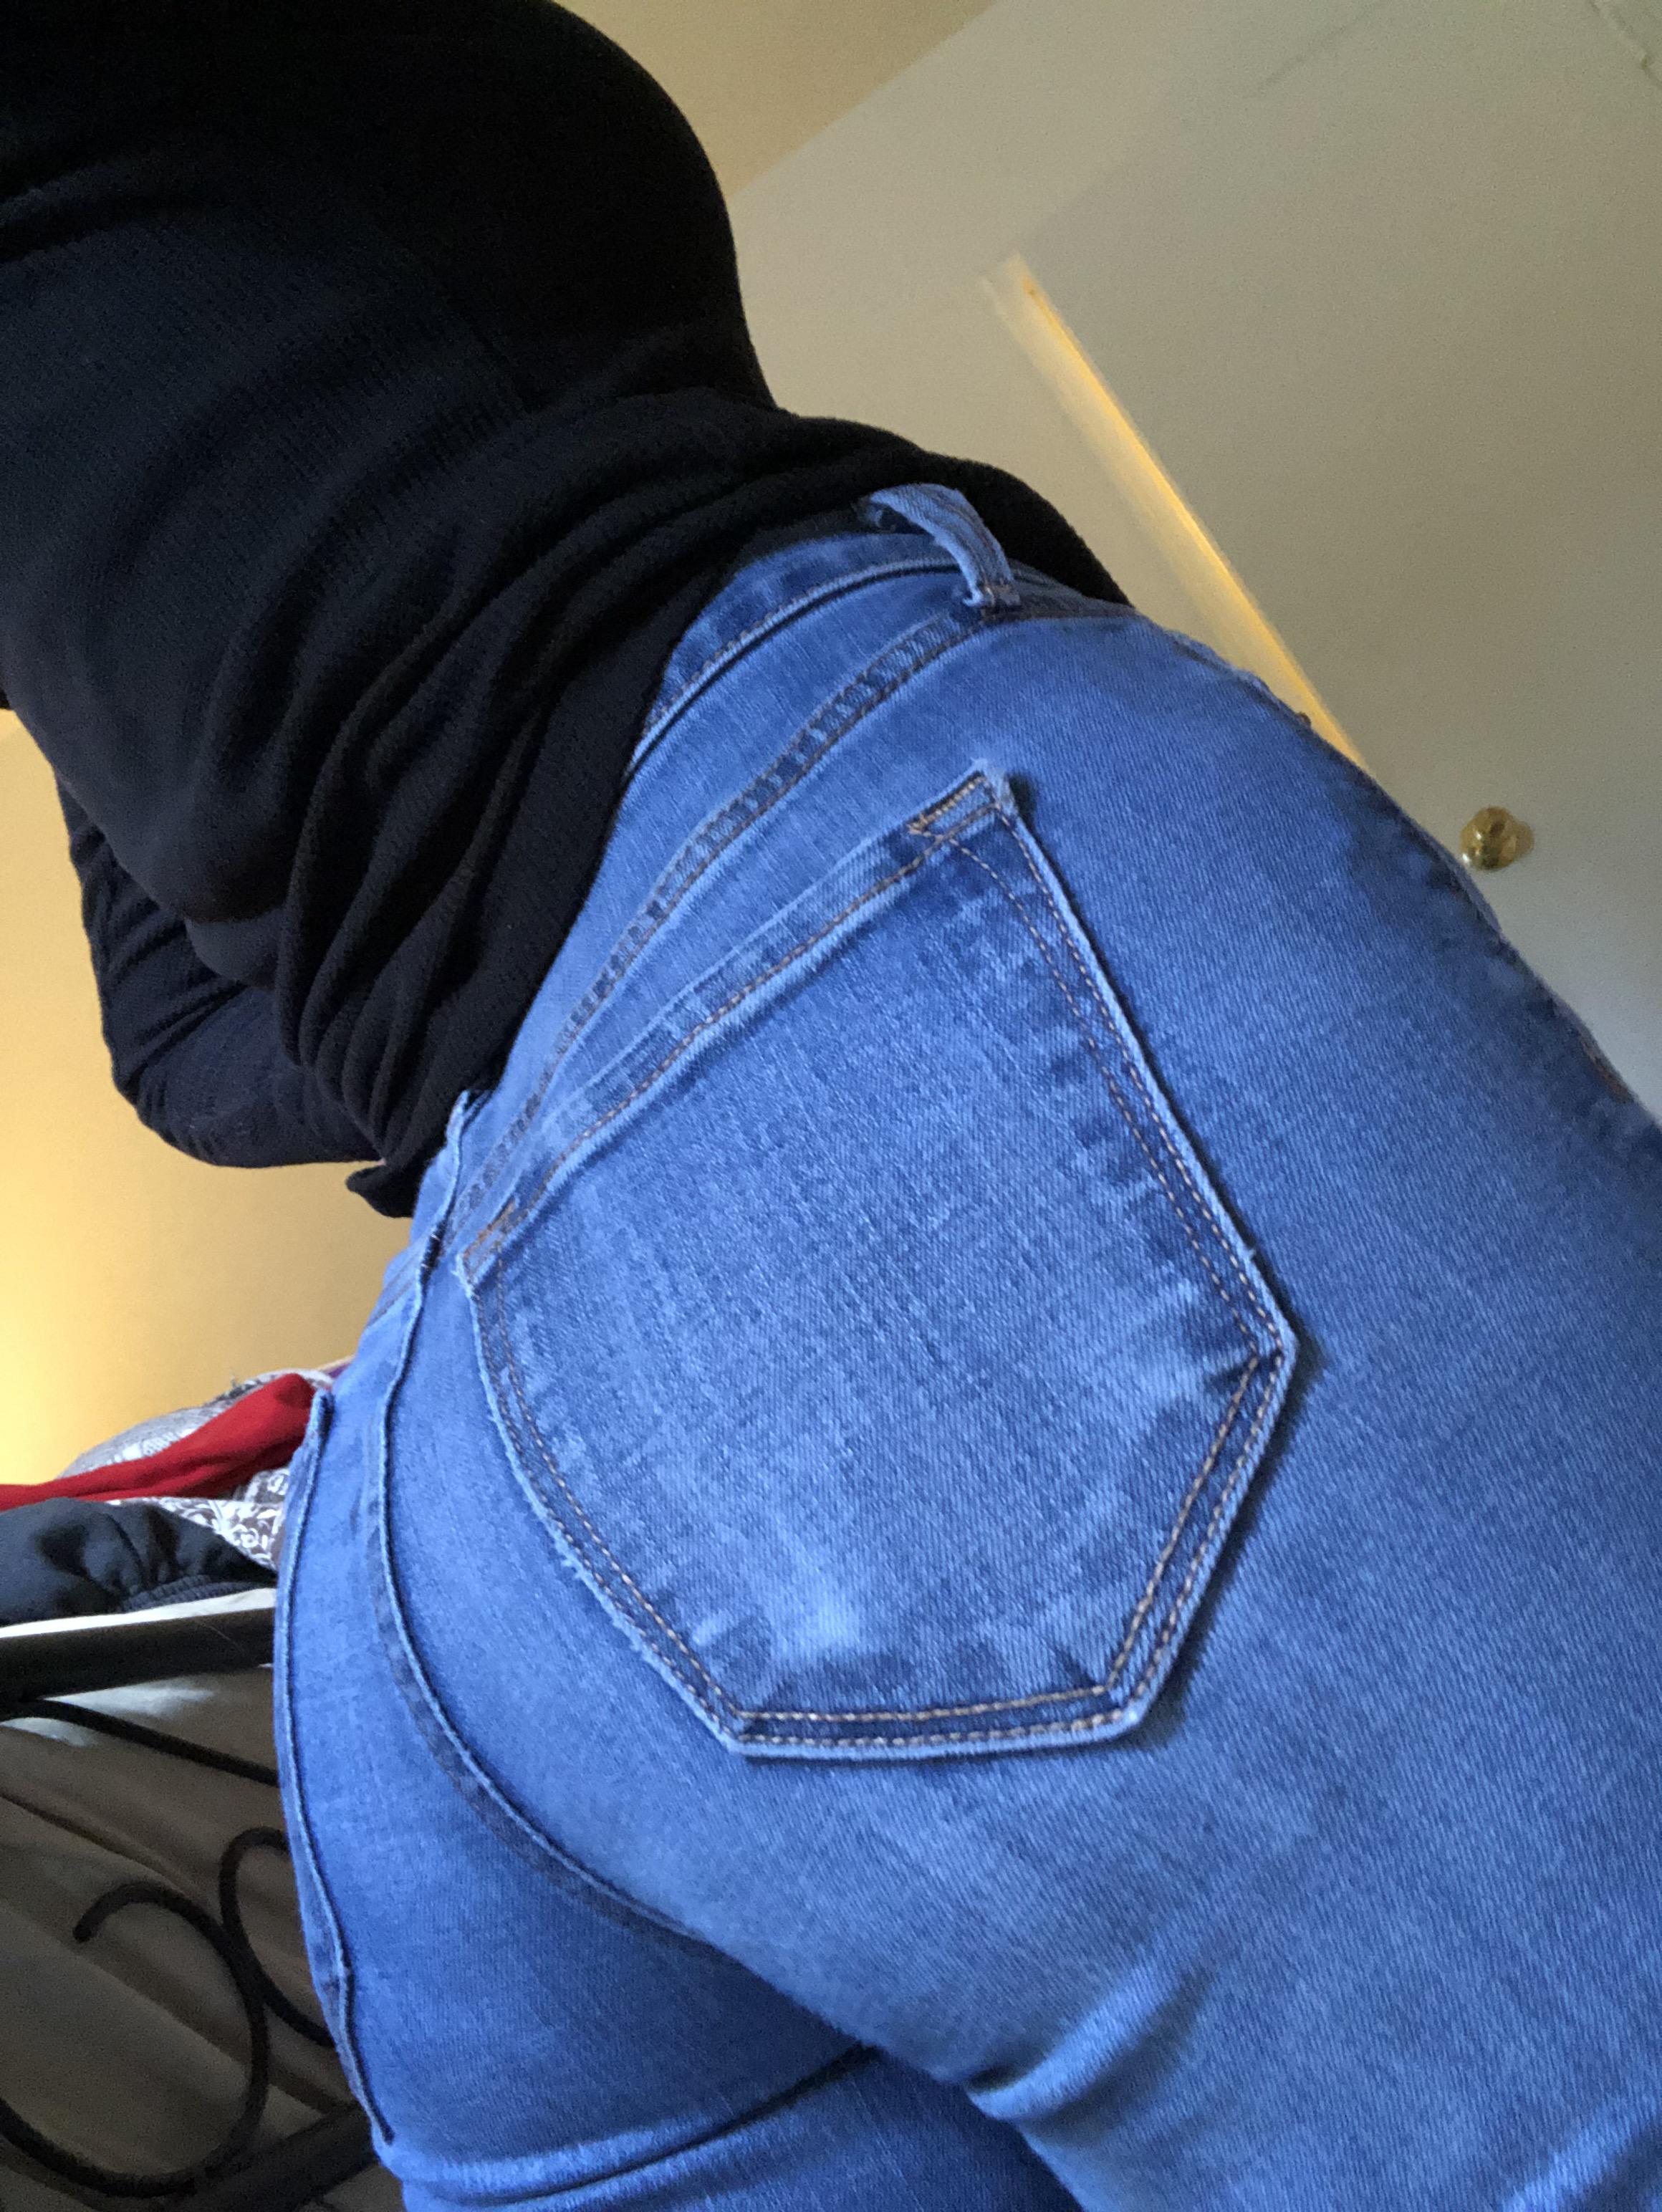 My favorite jeans are getting a little tighter | Scrolller